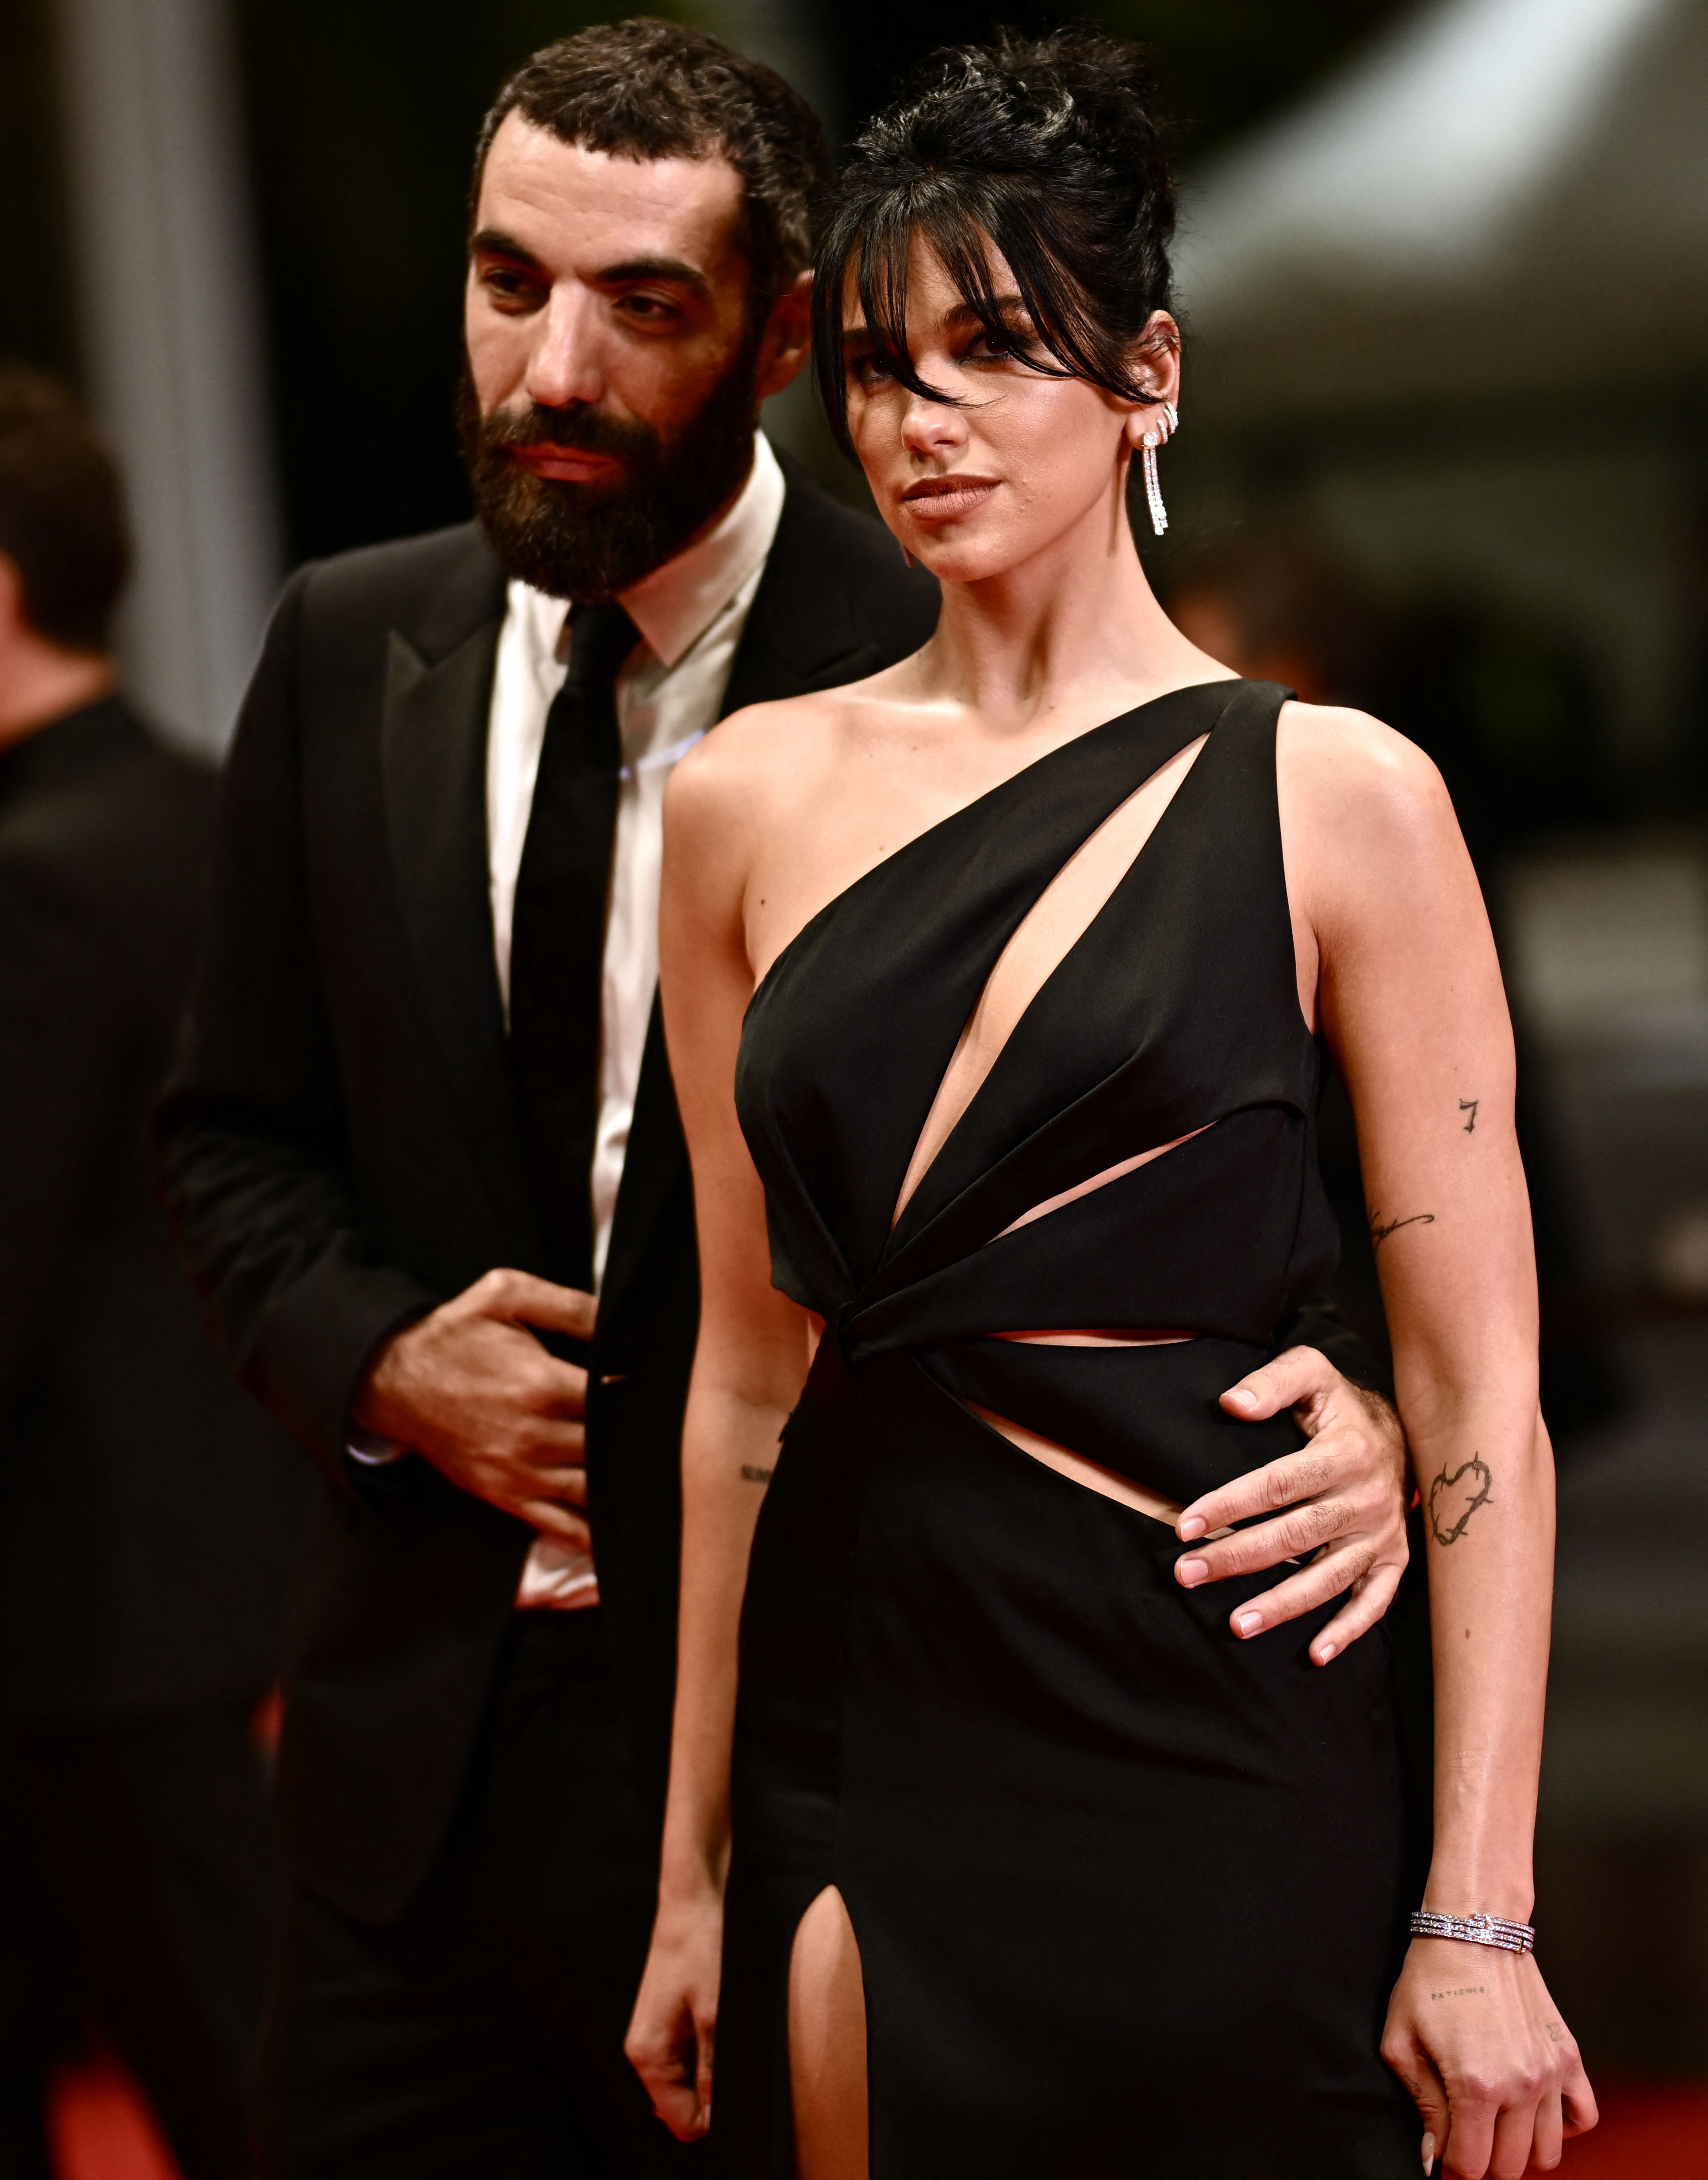 French director Romain Gavras (L) and British singer and model Dua Lipa arrive for the screening of the film "Omar la Fraise" (The King of Algiers) during the 76th edition of the Cannes Film Festival in Cannes, southern France, on May 20, 2023. (Photo by LOIC VENANCE / AFP) (Photo by LOIC VENANCE/AFP via Getty Images)